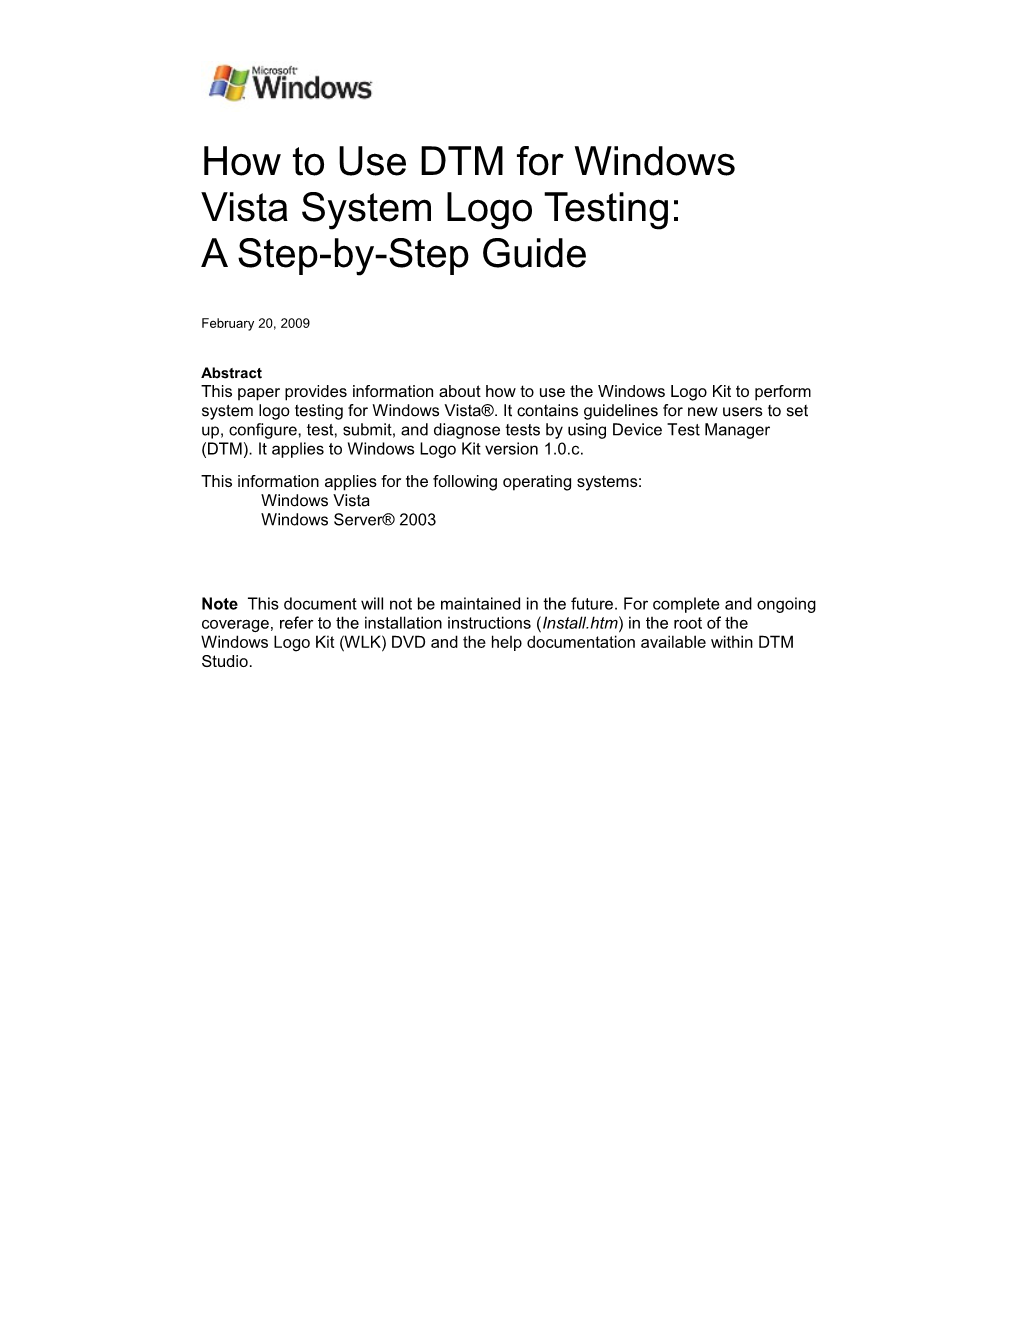 How to Use DTM for Windows Vista System Logo Testing: a Step-By-Step Guide - 14